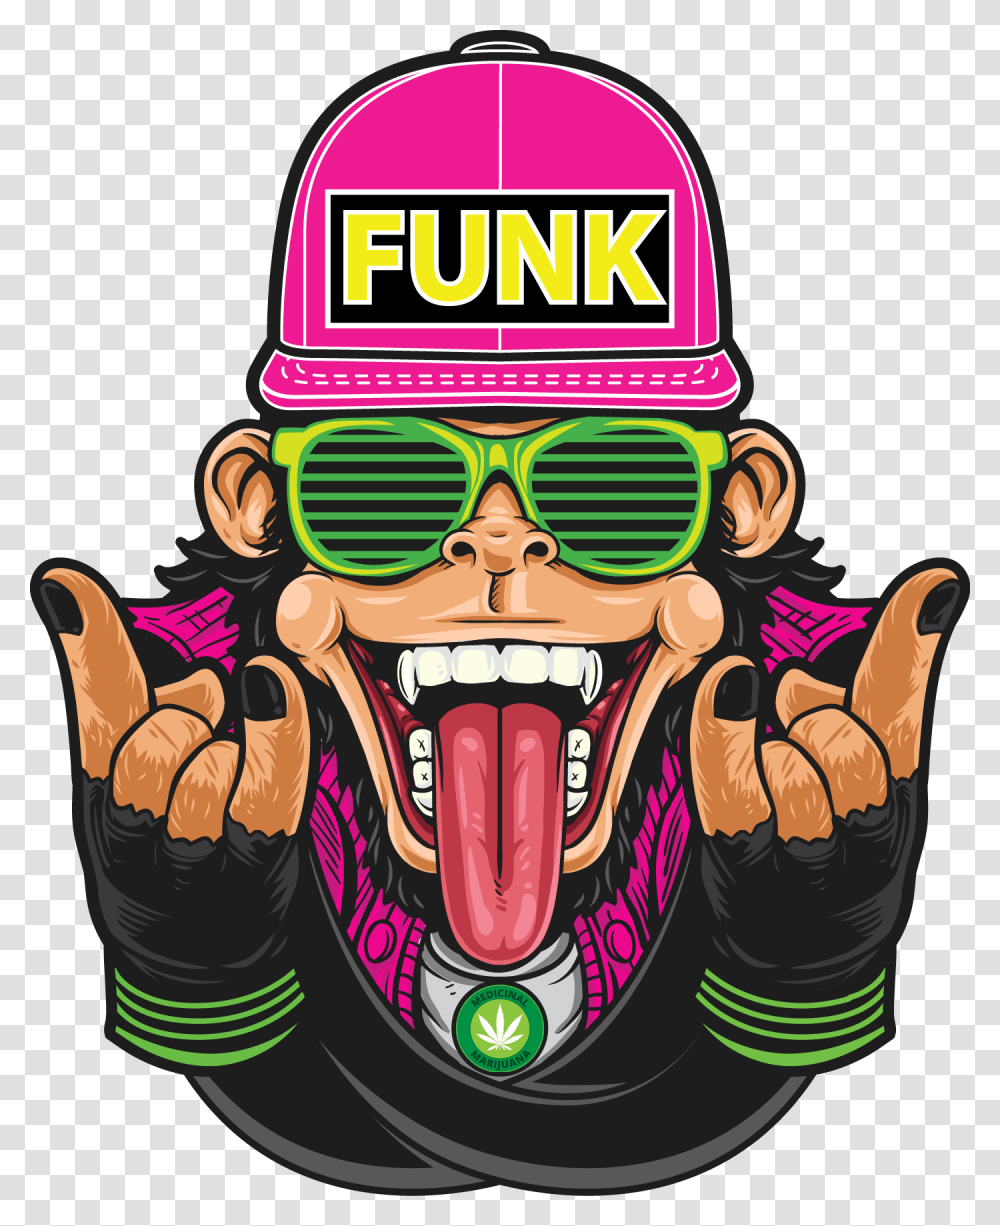 Munkie Extracts Home Expand Your Mind Body Monkey Funk, Sunglasses, Accessories, Accessory, Poster Transparent Png